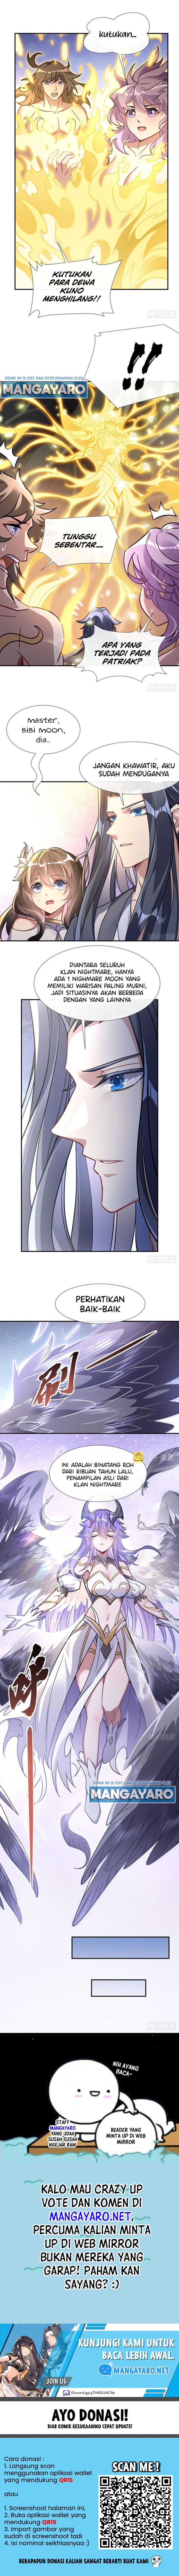 Dilarang COPAS - situs resmi www.mangacanblog.com - Komik my female apprentices are all big shots from the future 113 - chapter 113 114 Indonesia my female apprentices are all big shots from the future 113 - chapter 113 Terbaru 5|Baca Manga Komik Indonesia|Mangacan